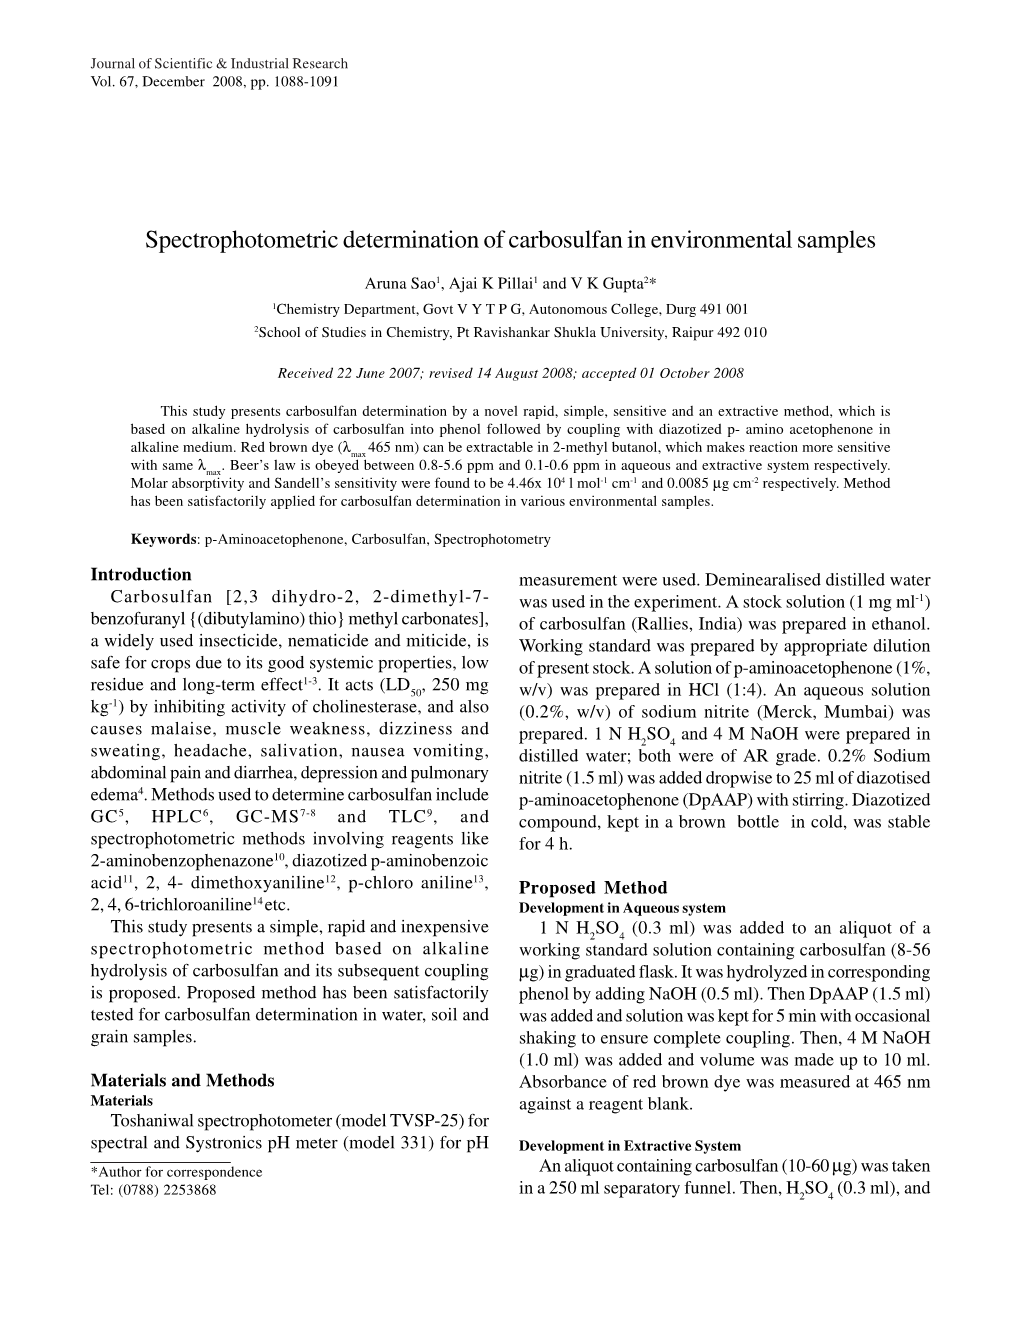 Spectrophotometric Determination of Carbosulfan in Environmental Samples